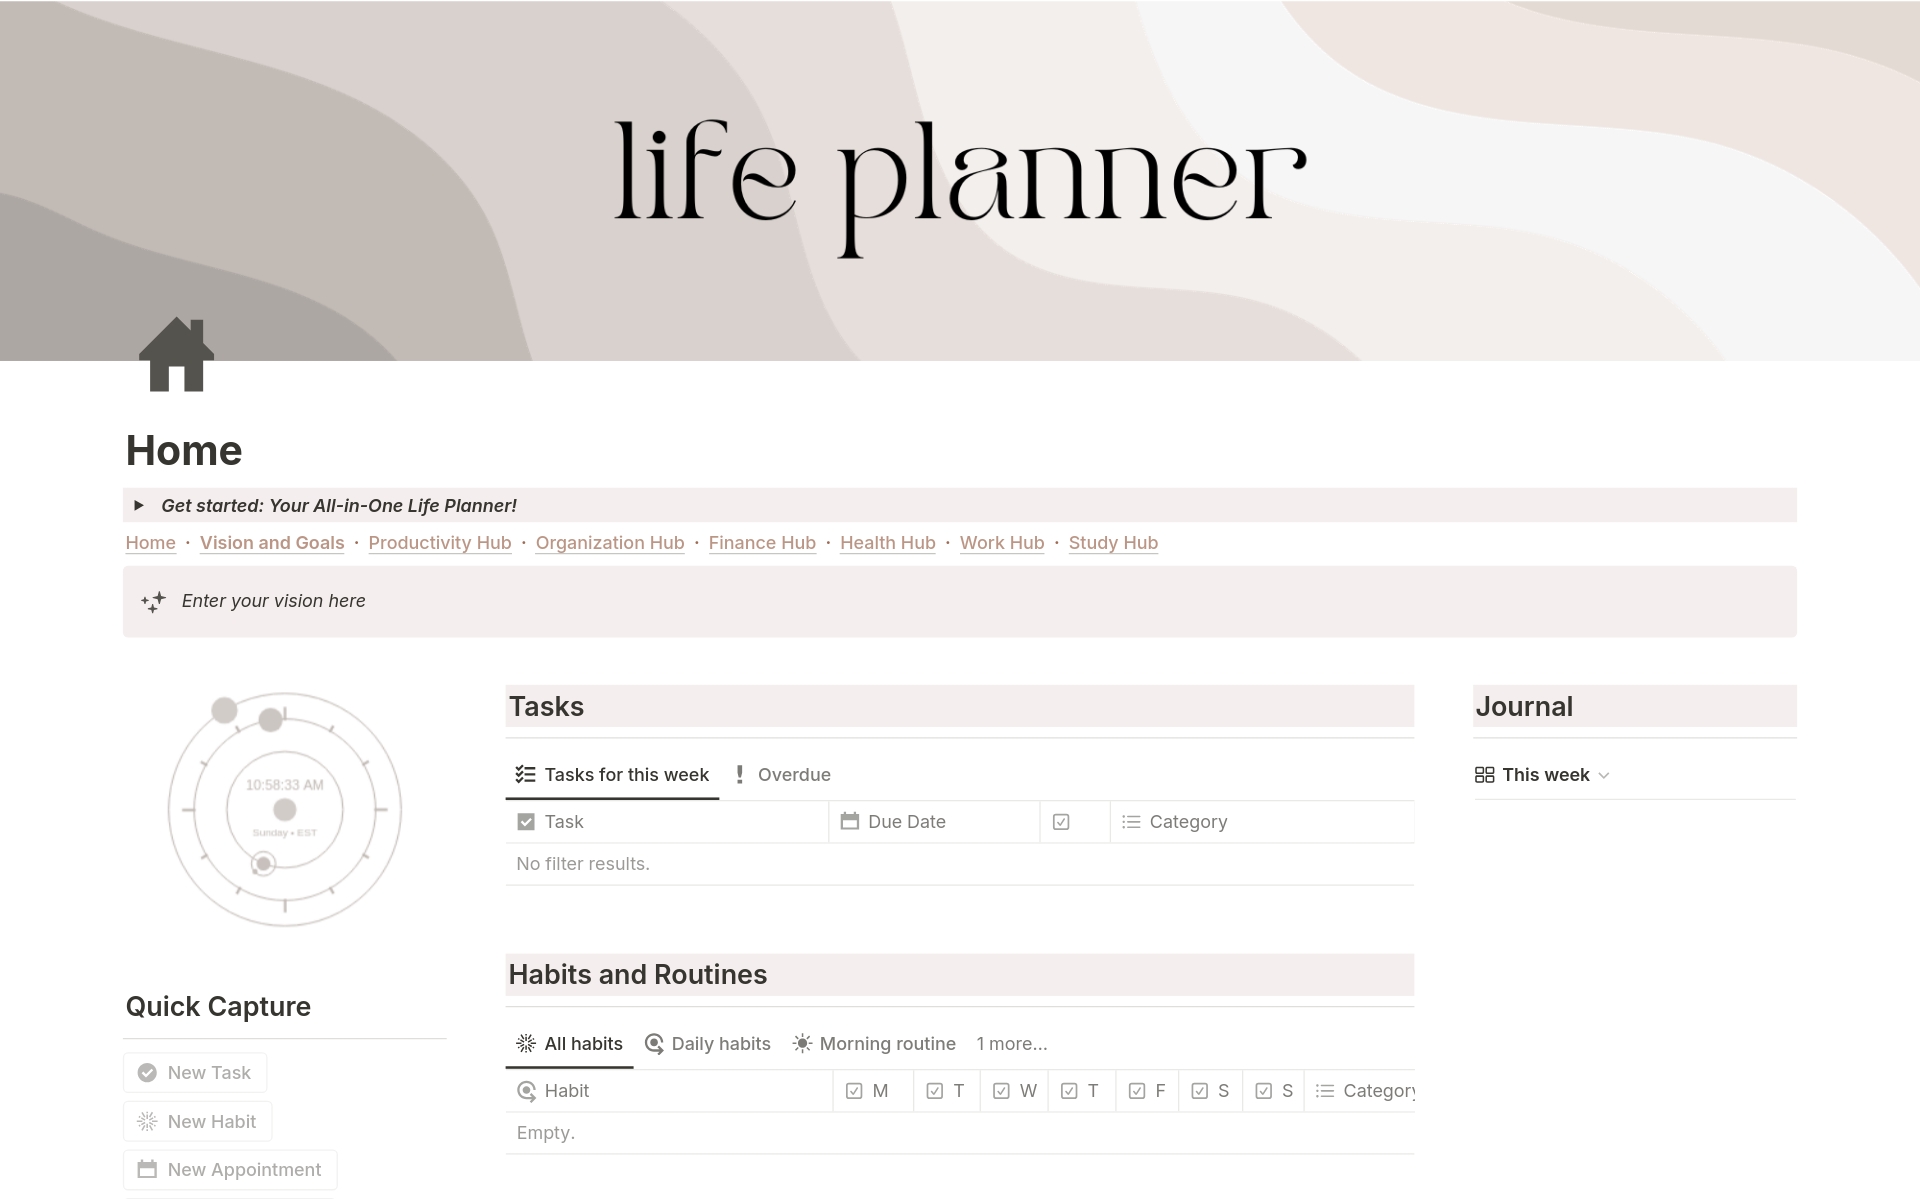 - Automated template organized in seven different hubs, all connected by a linked calendar and task list
- Over 50 pages included for organizing (nearly) every aspect of daily life, including a section for work and studies
- Aesthetic template with customizable design